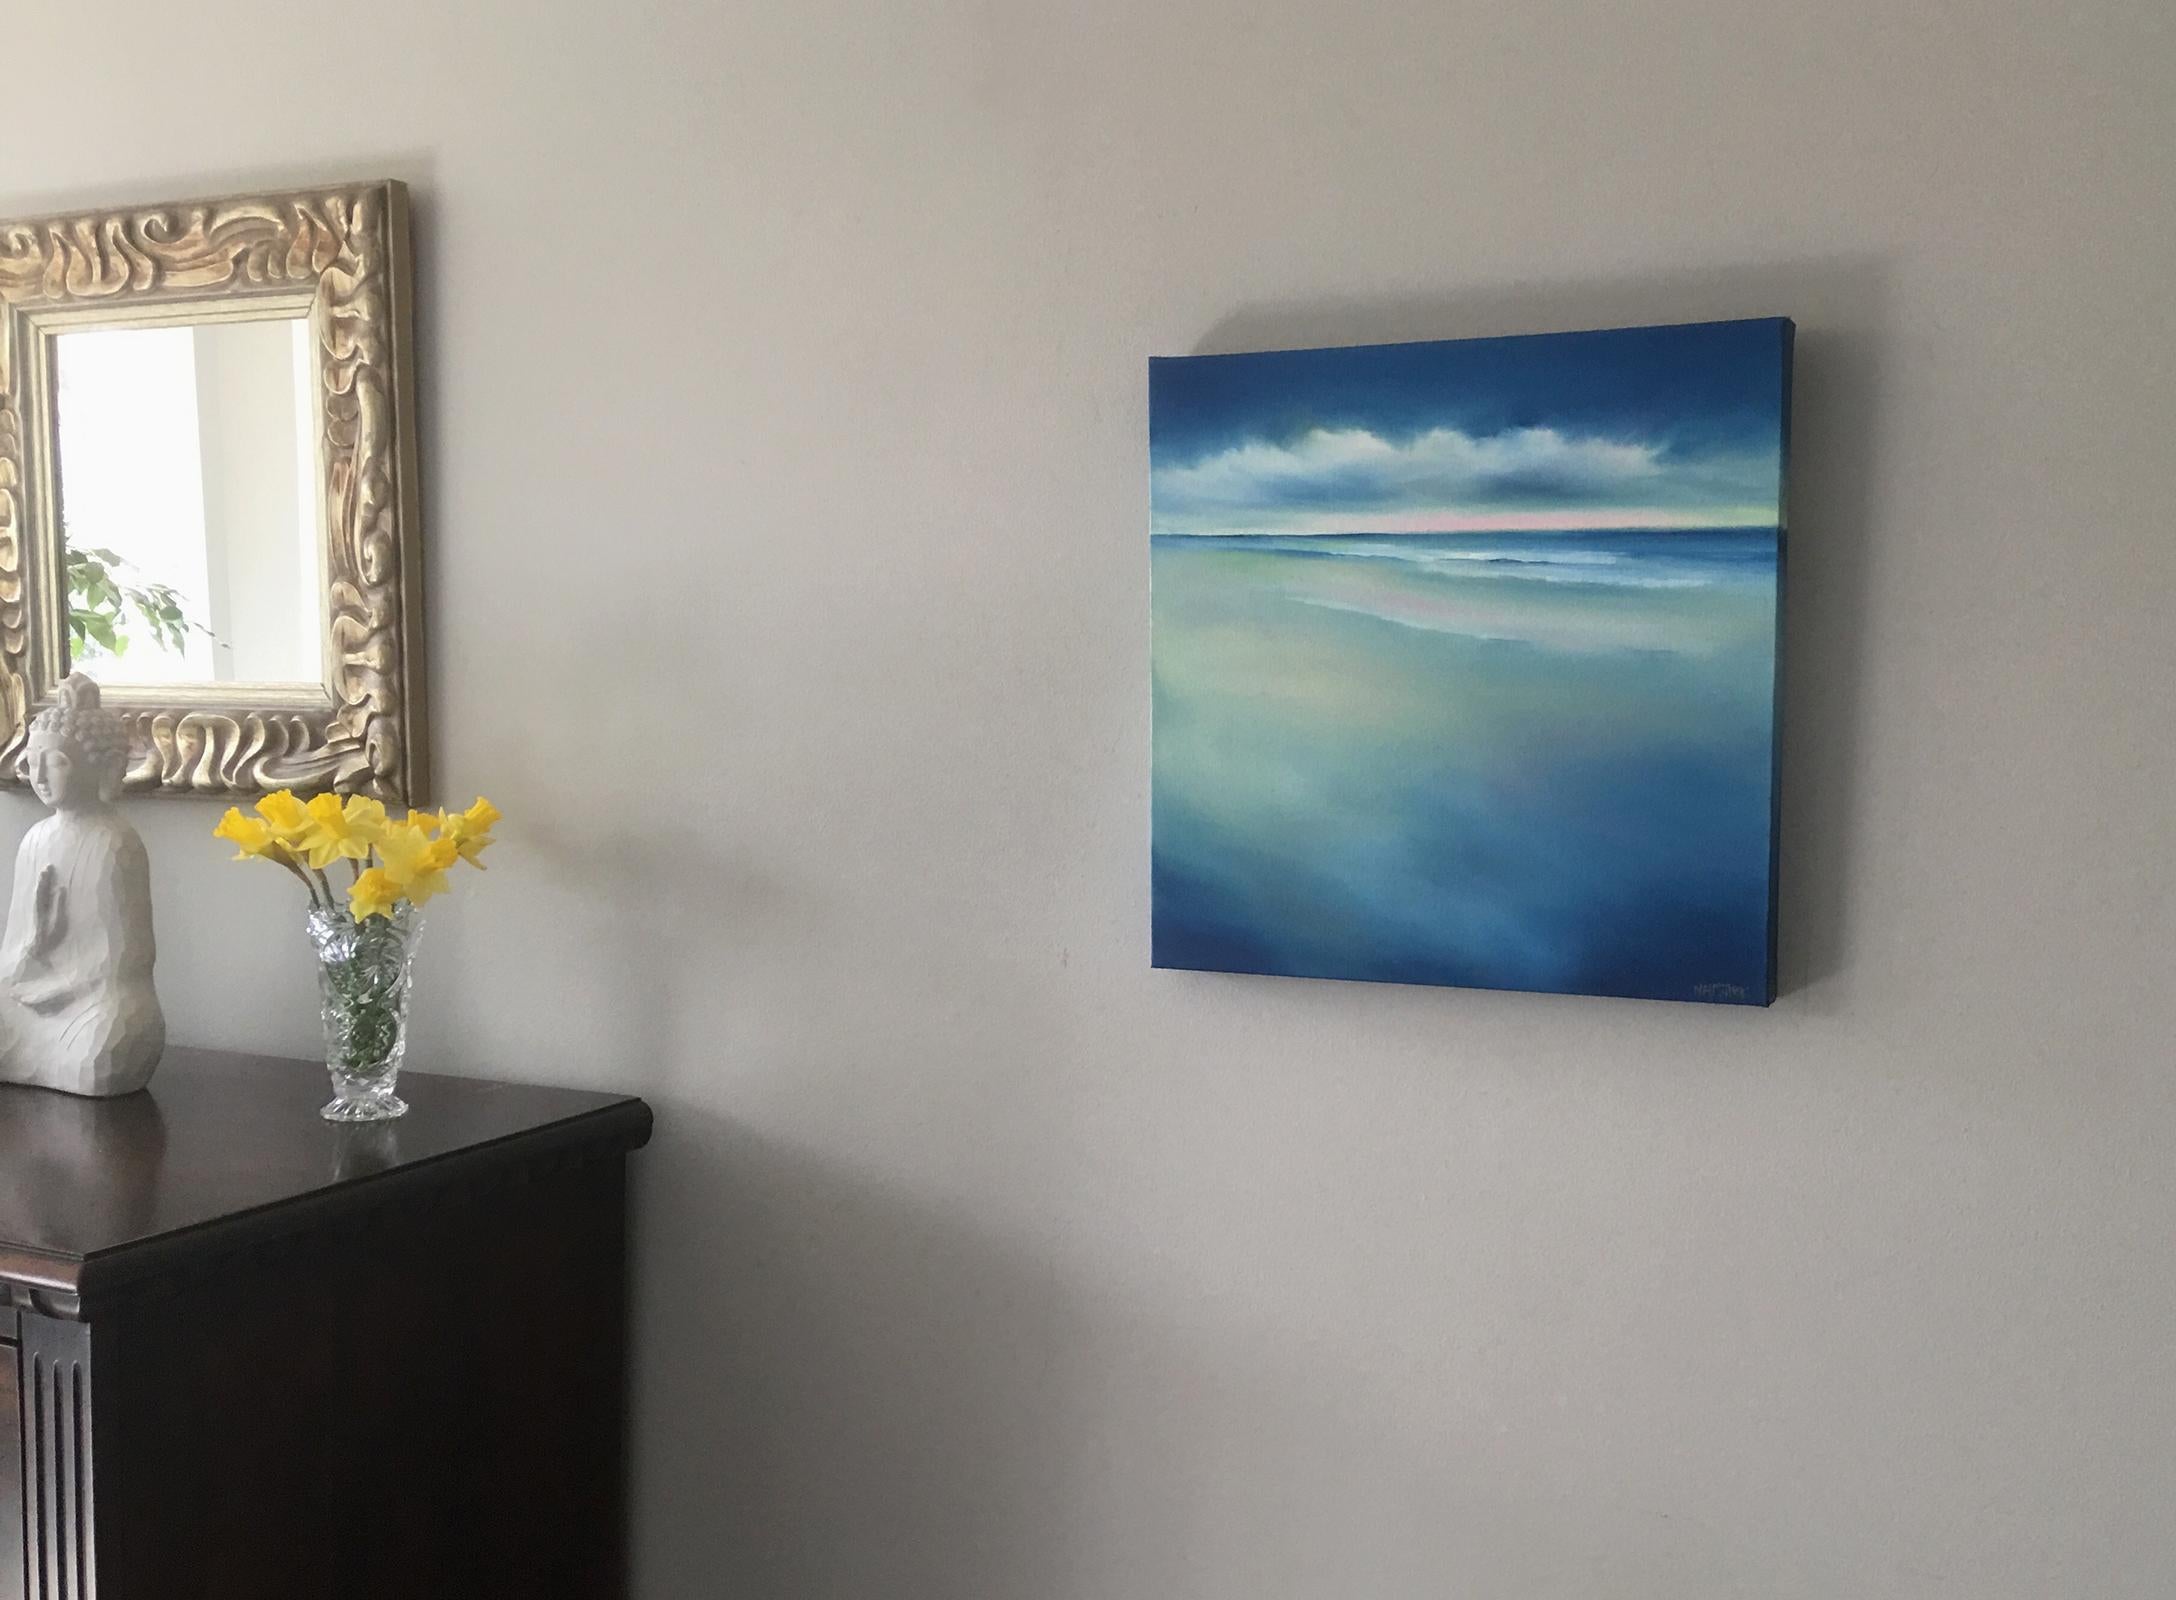 <p>Artist Comments<br>Number two of my Seaside Blues series. The clouds and sky create a moody atmosphere in my modern take on a seascape. I am inspired by the light on the horizon hinting at the start or end of a good day.</p><p>About the